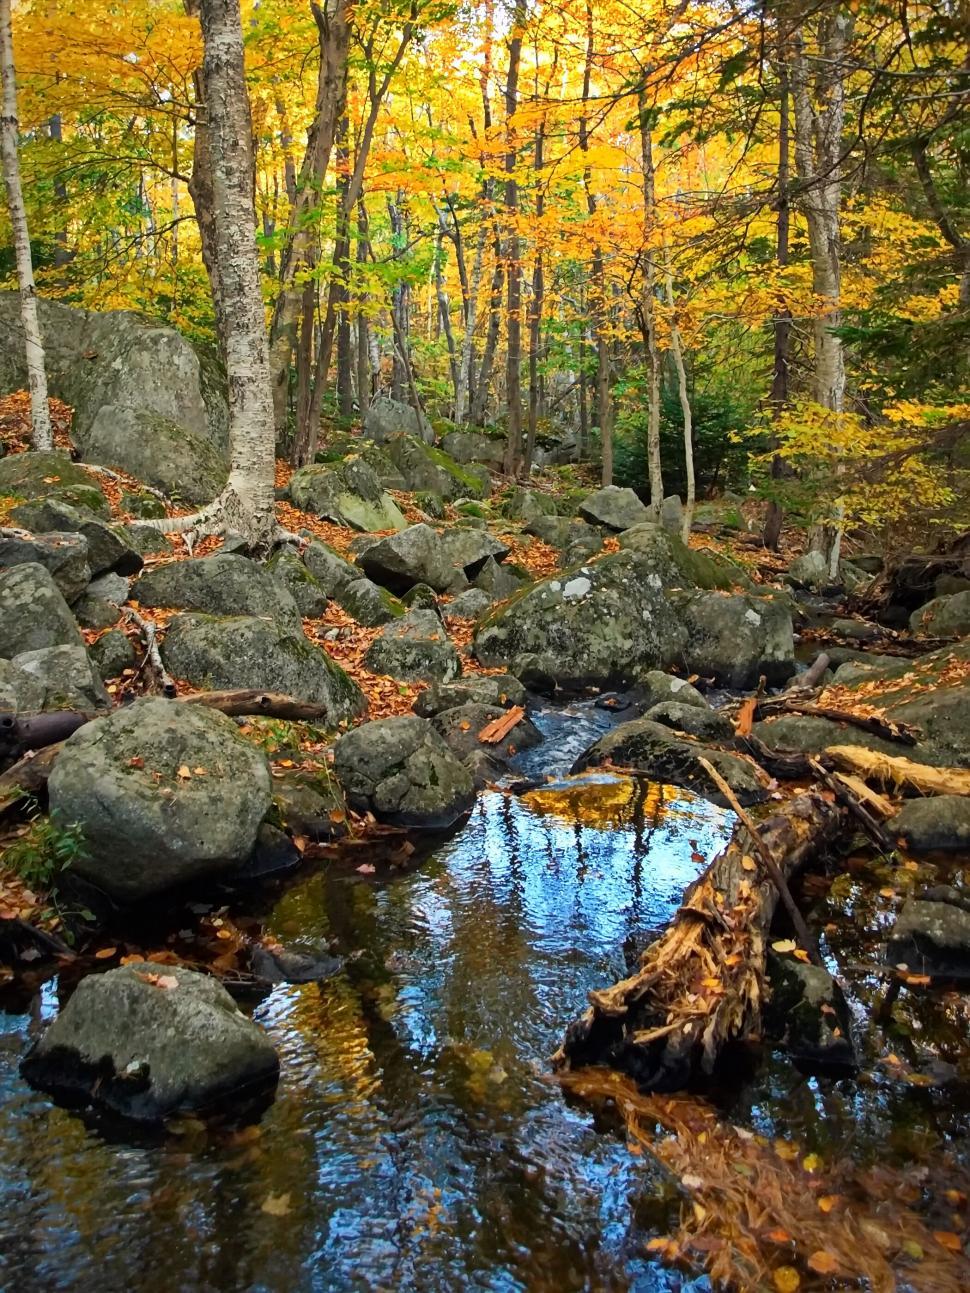 Free Image of Autumn forest with stream and boulders 